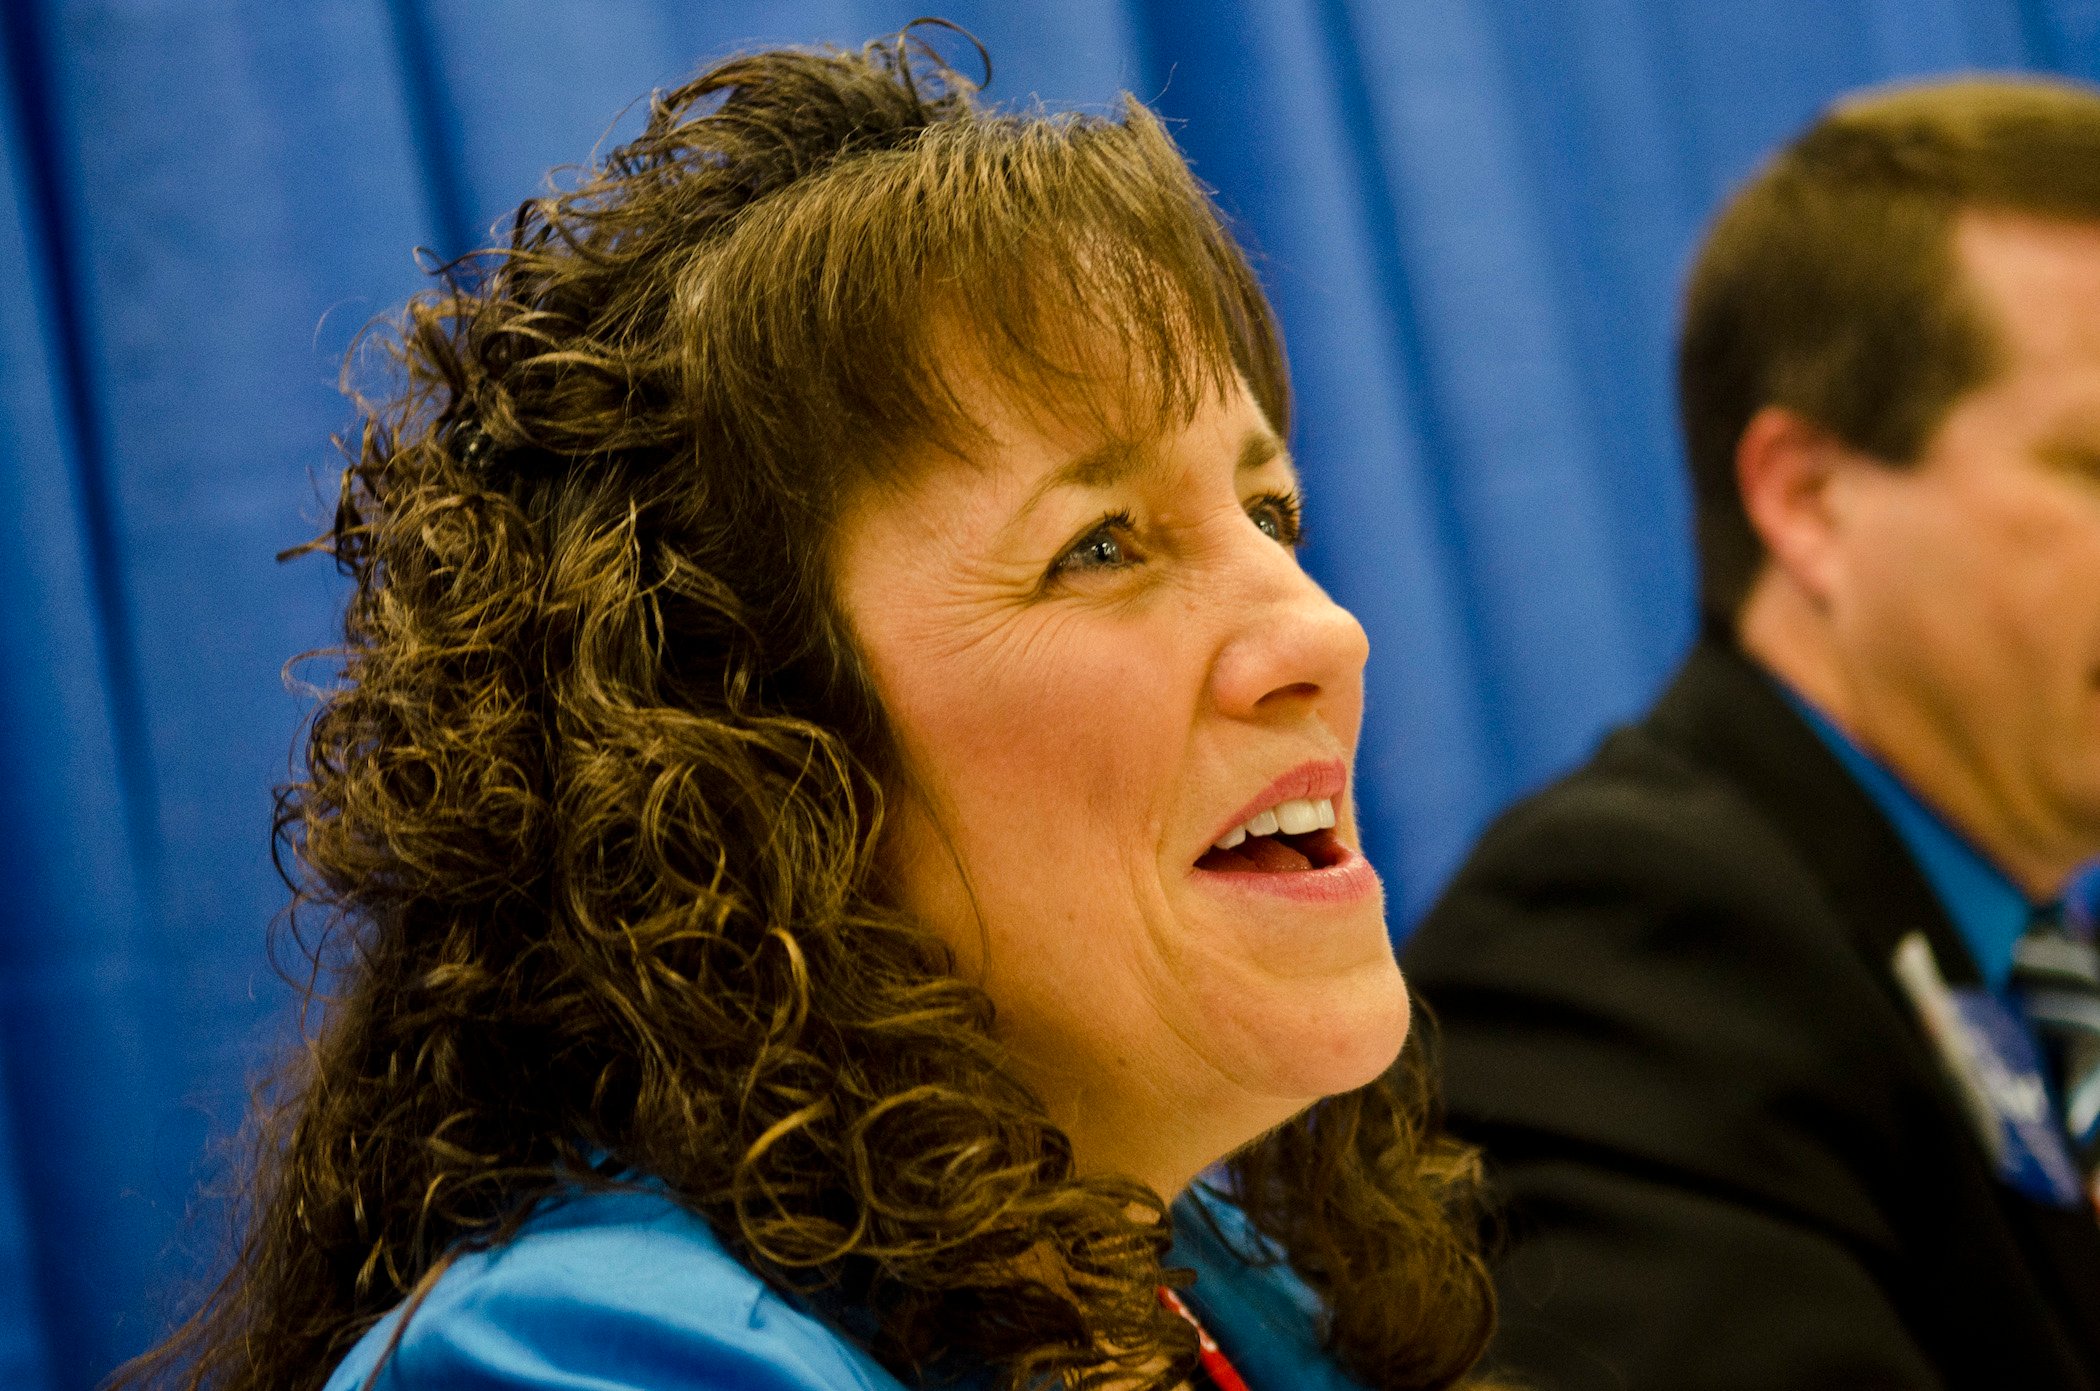 Duggar Family Critics Think the Years of Caring for a Huge Family Are Finally Catching Up With Michelle Duggar